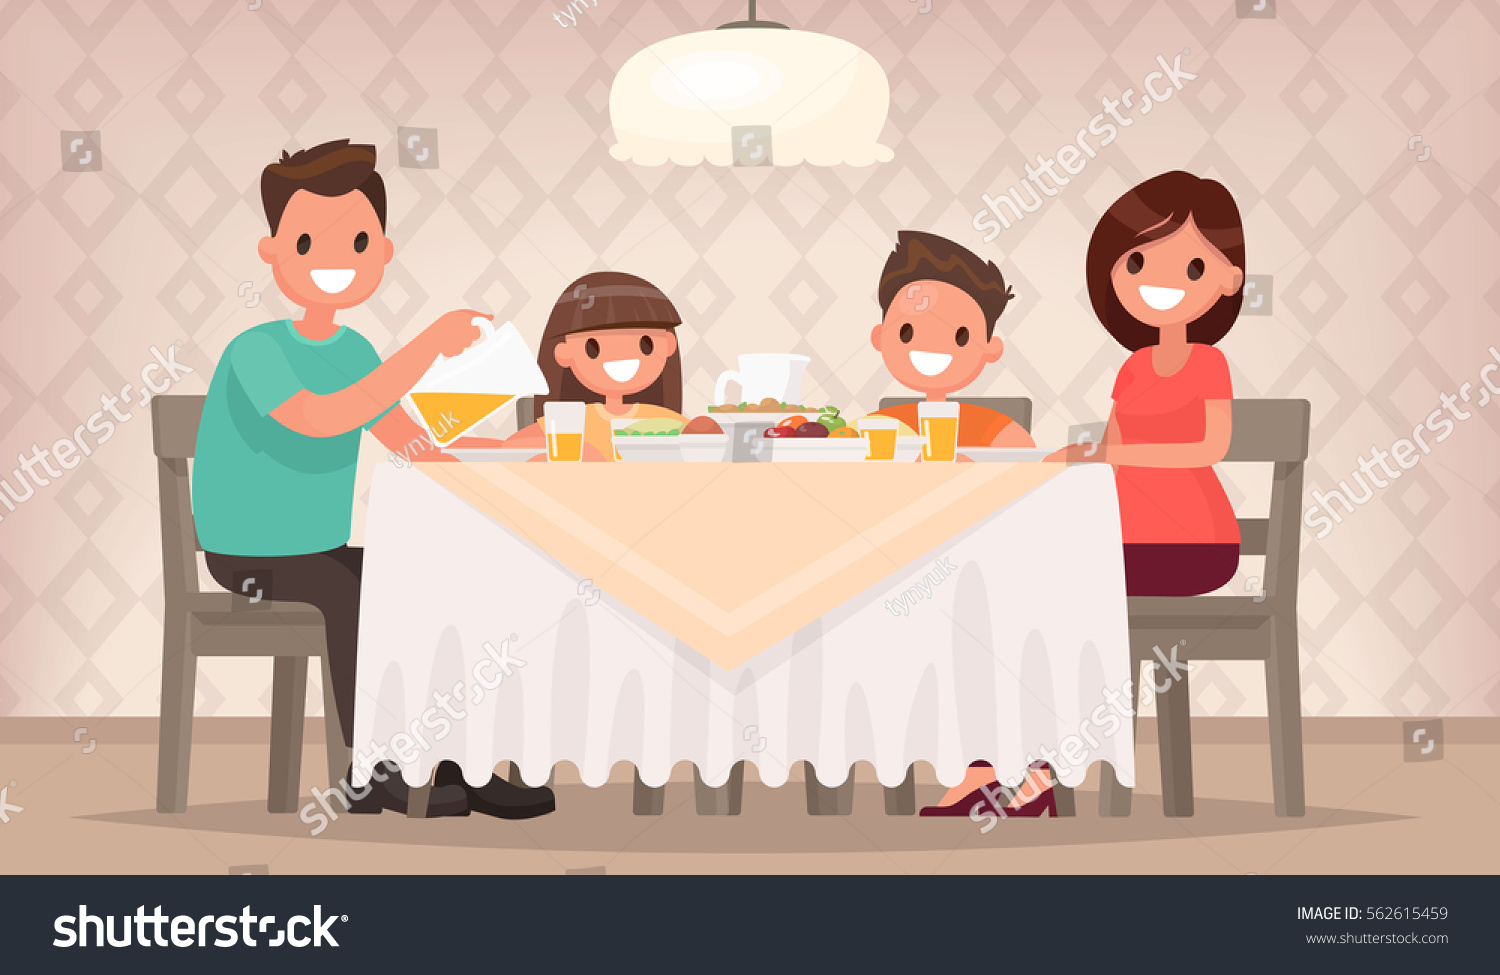 Family meal. Father mother, son and daughter together sit at the table and have lunch. Vector illustration in a flat style #562615459